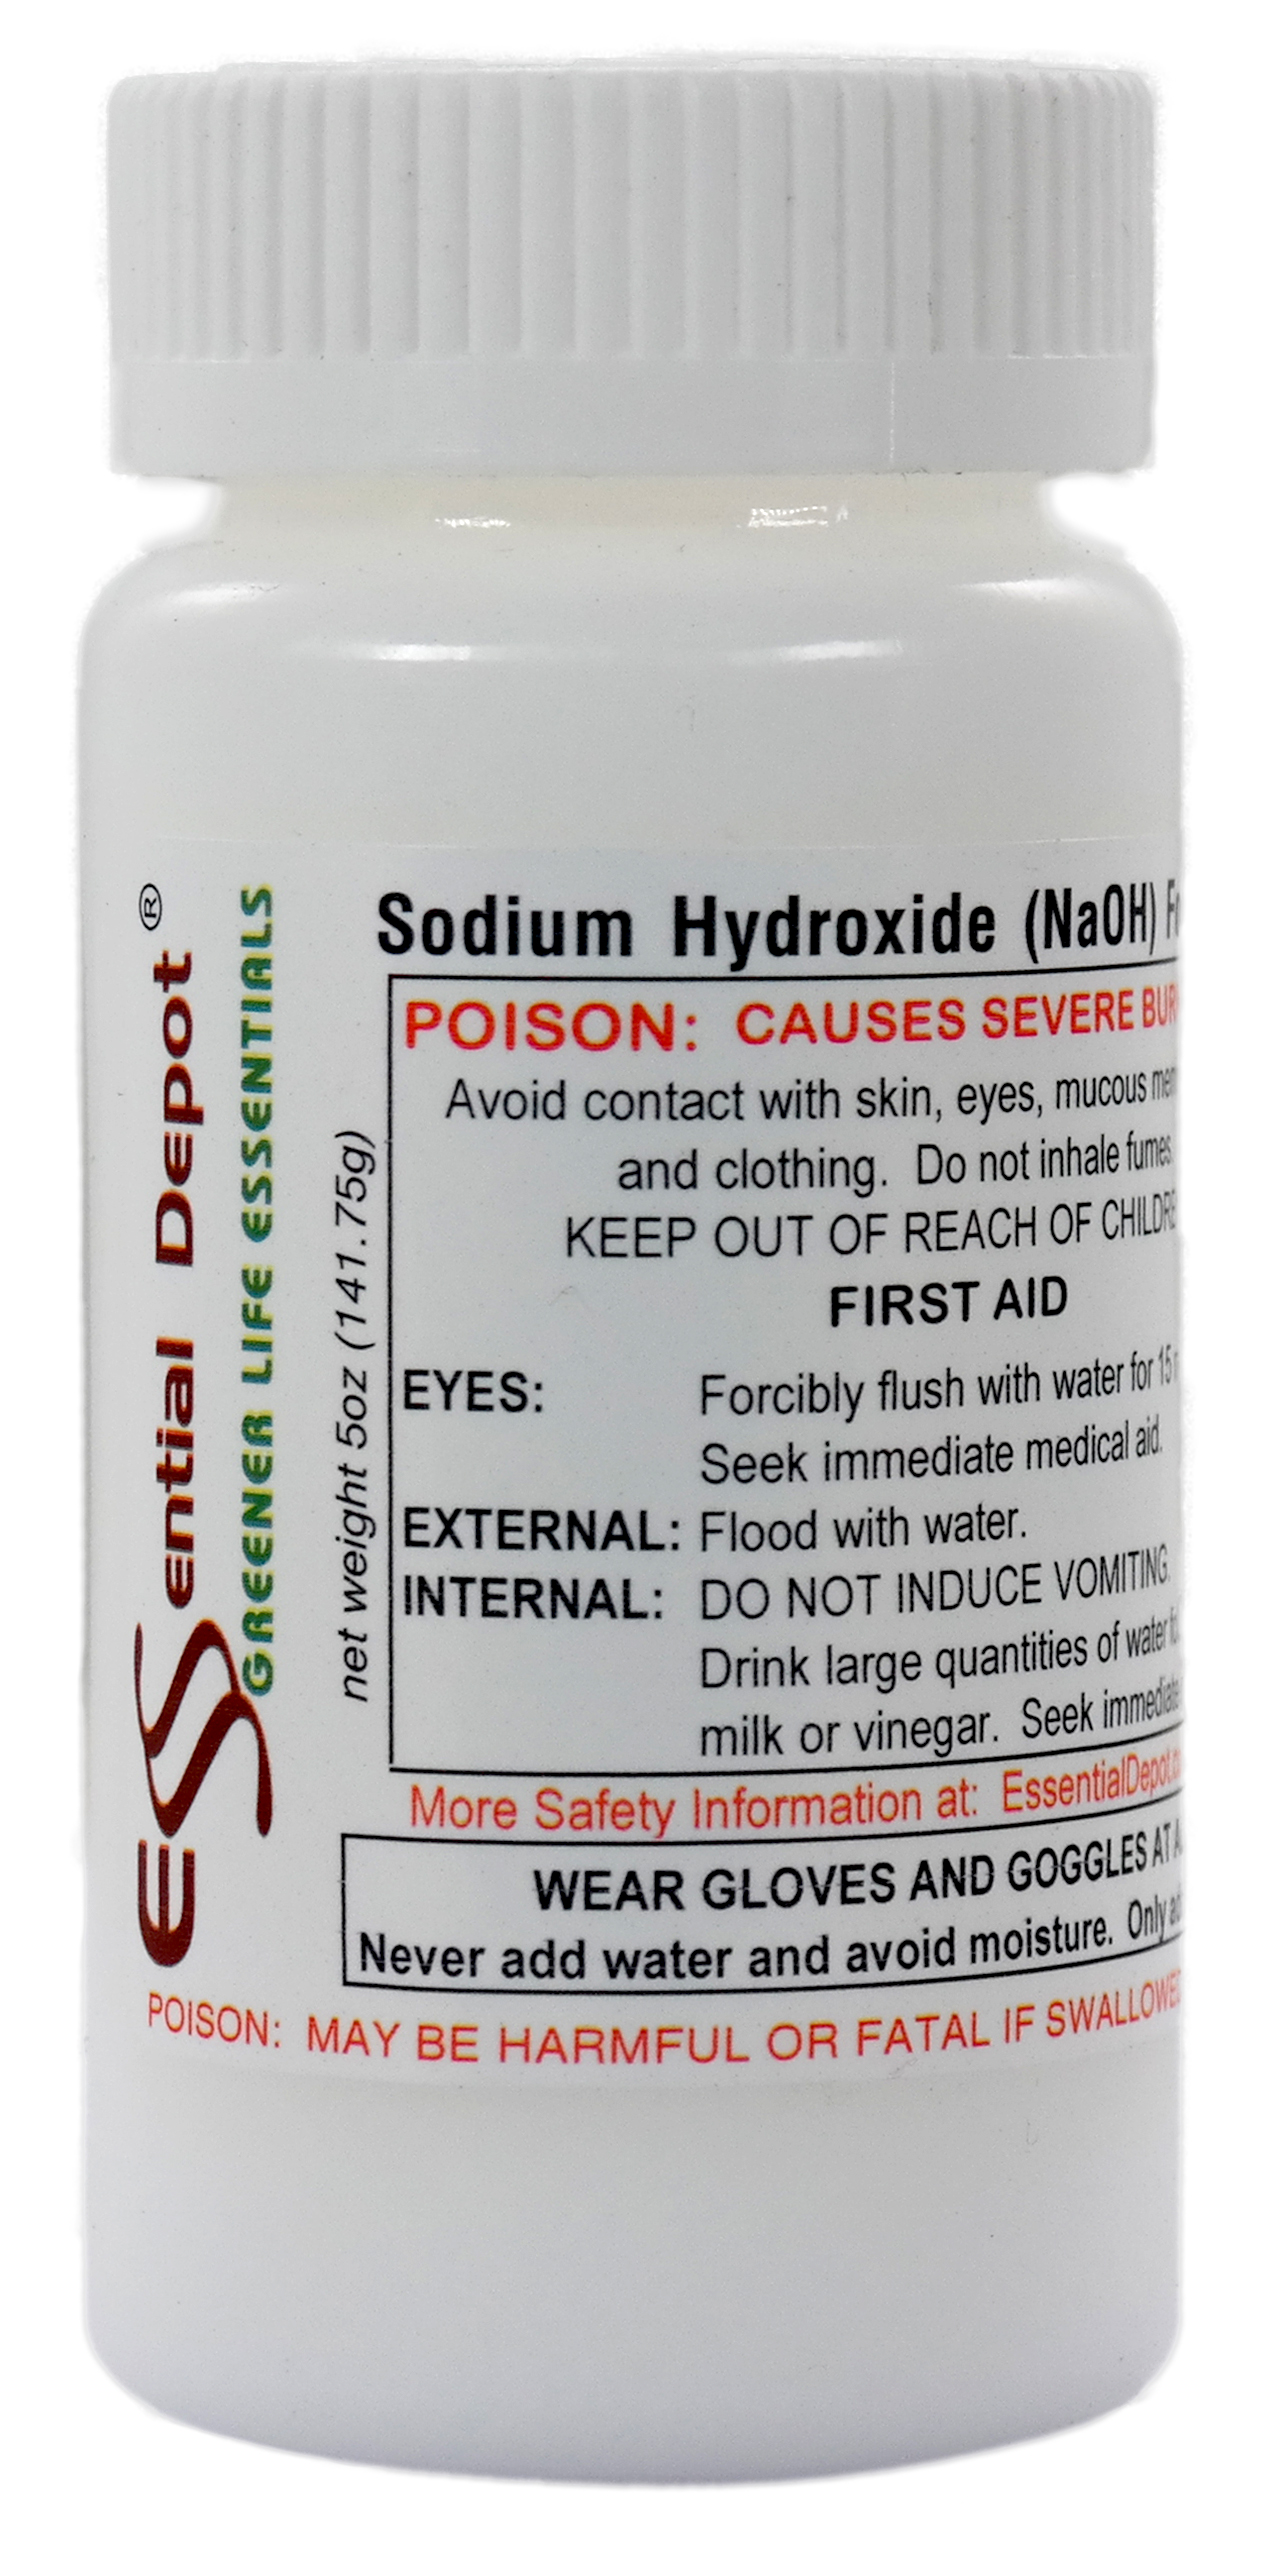 Sodium Hydroxide - What Is Lye? How Is Lye Used In Skincare? - The